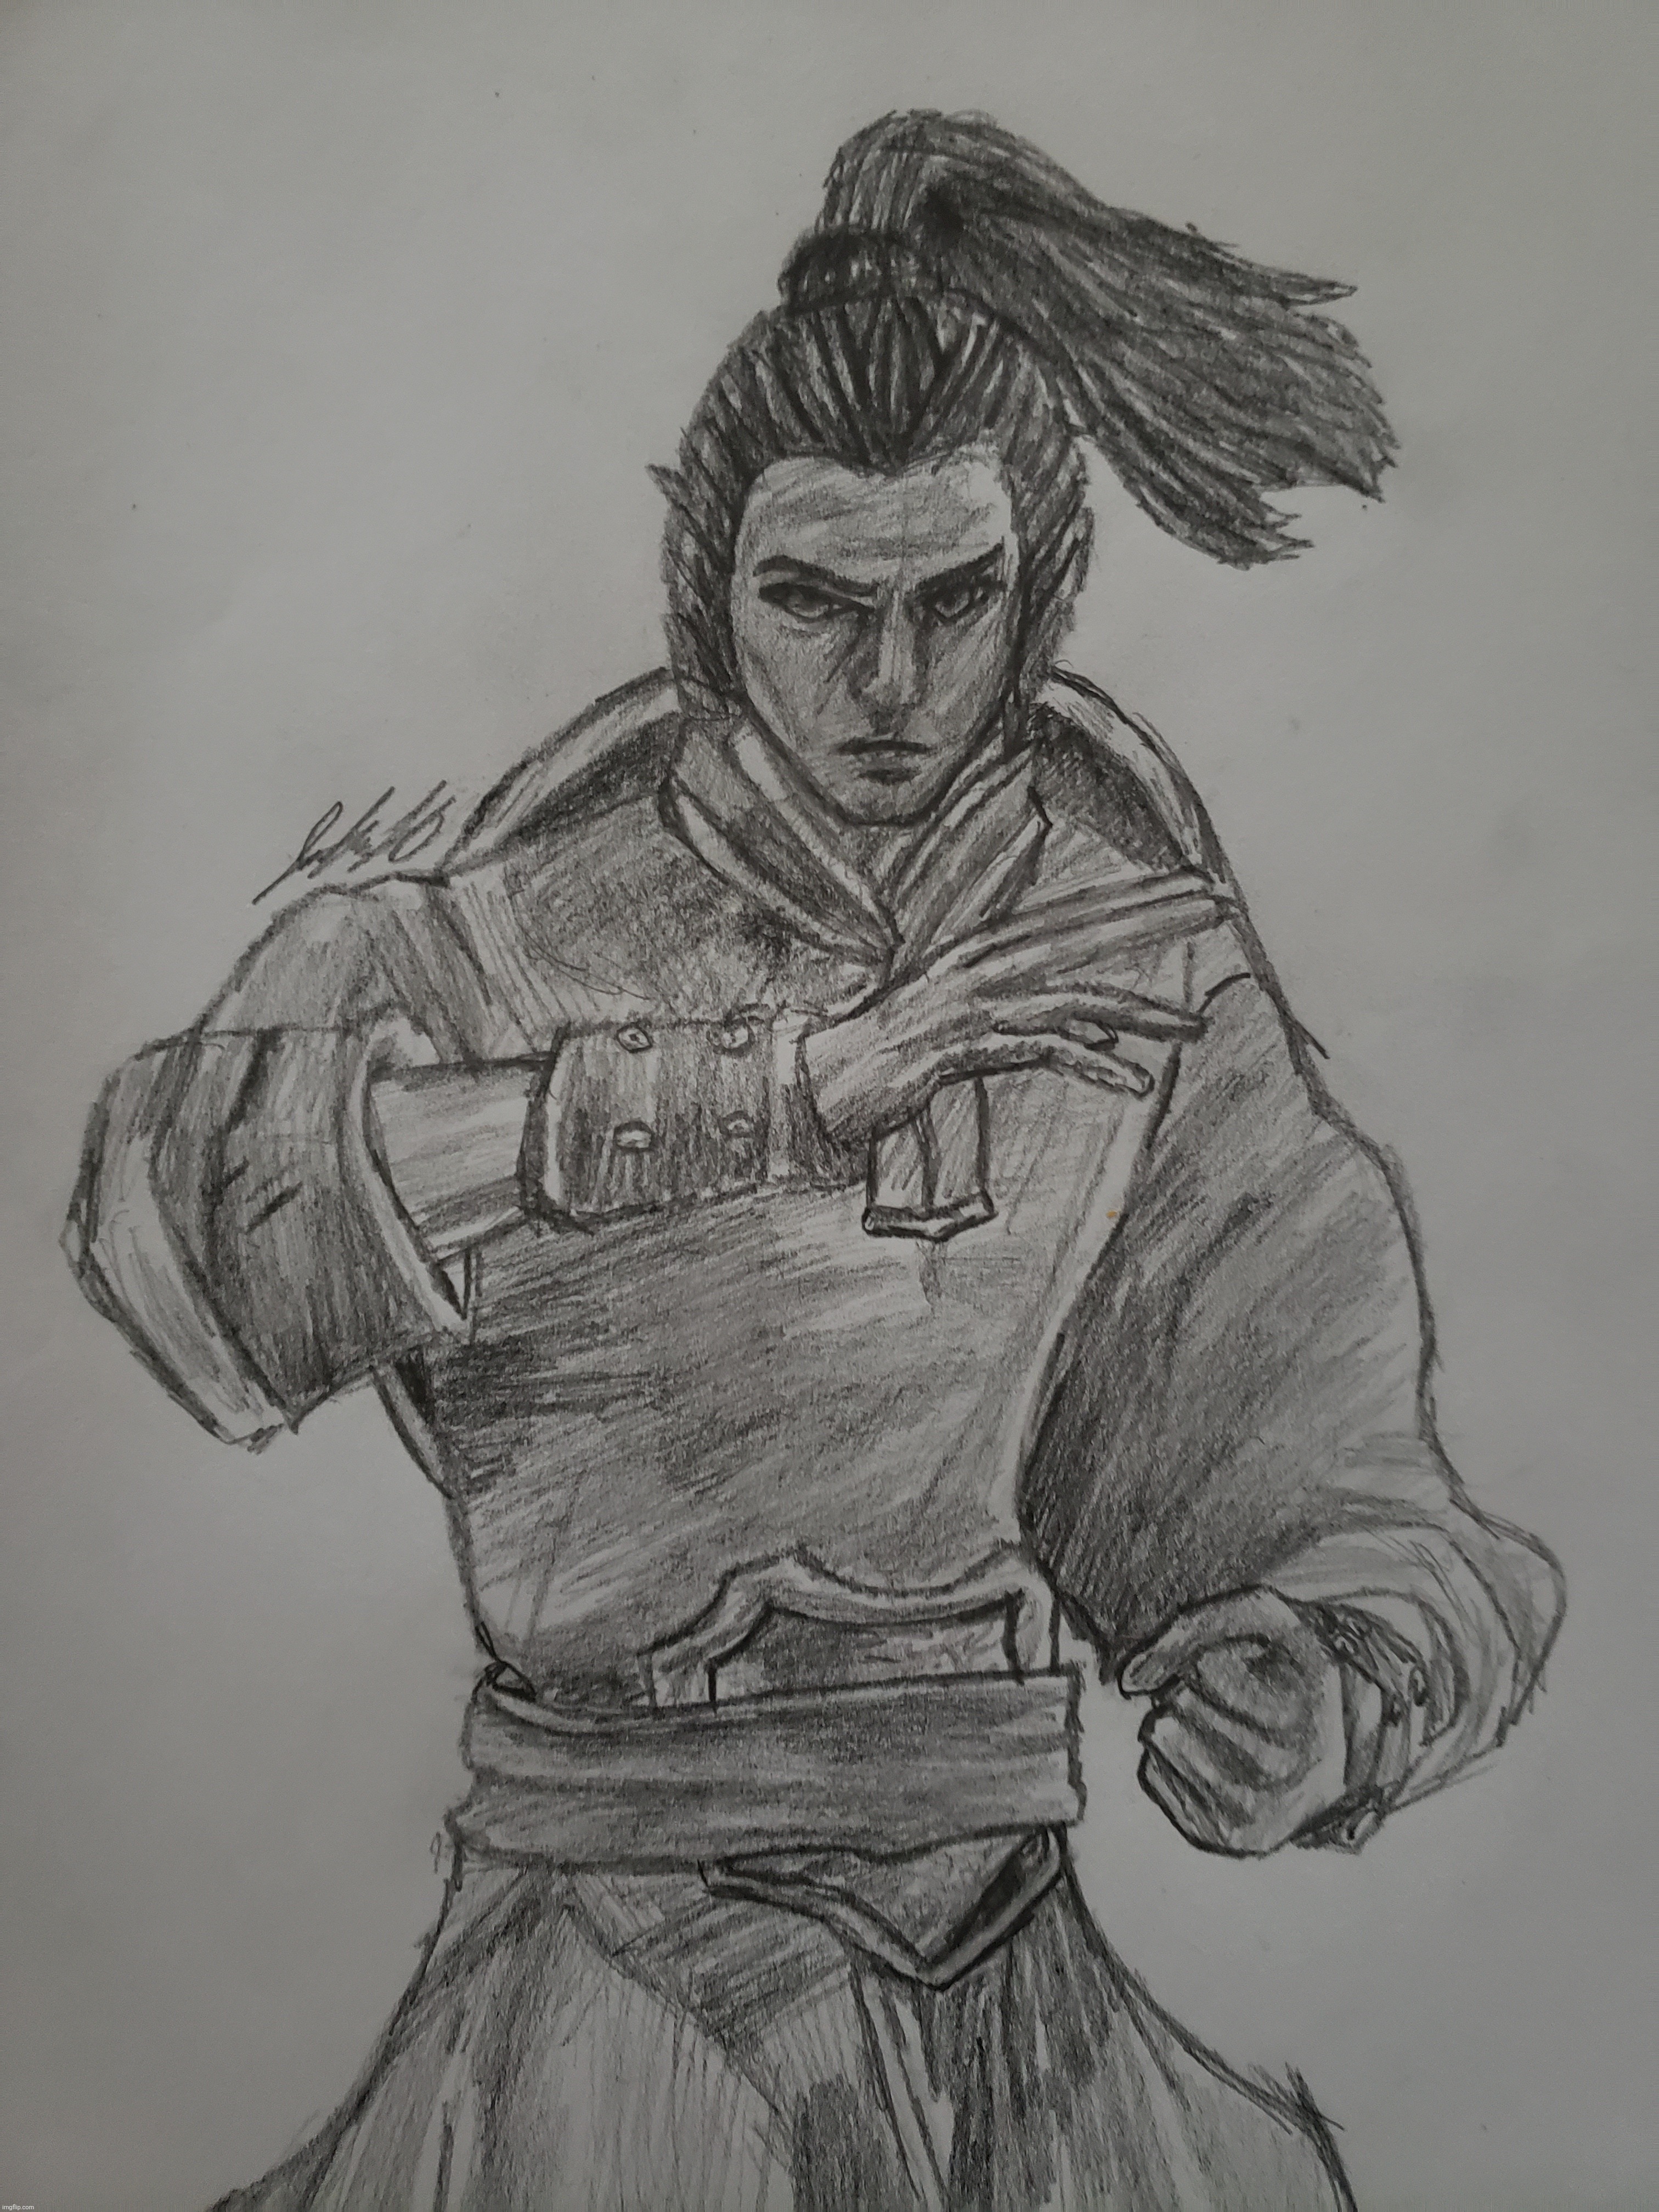 Kung Lao (Deadly Alliance) | image tagged in drawings,mortal kombat | made w/ Imgflip meme maker